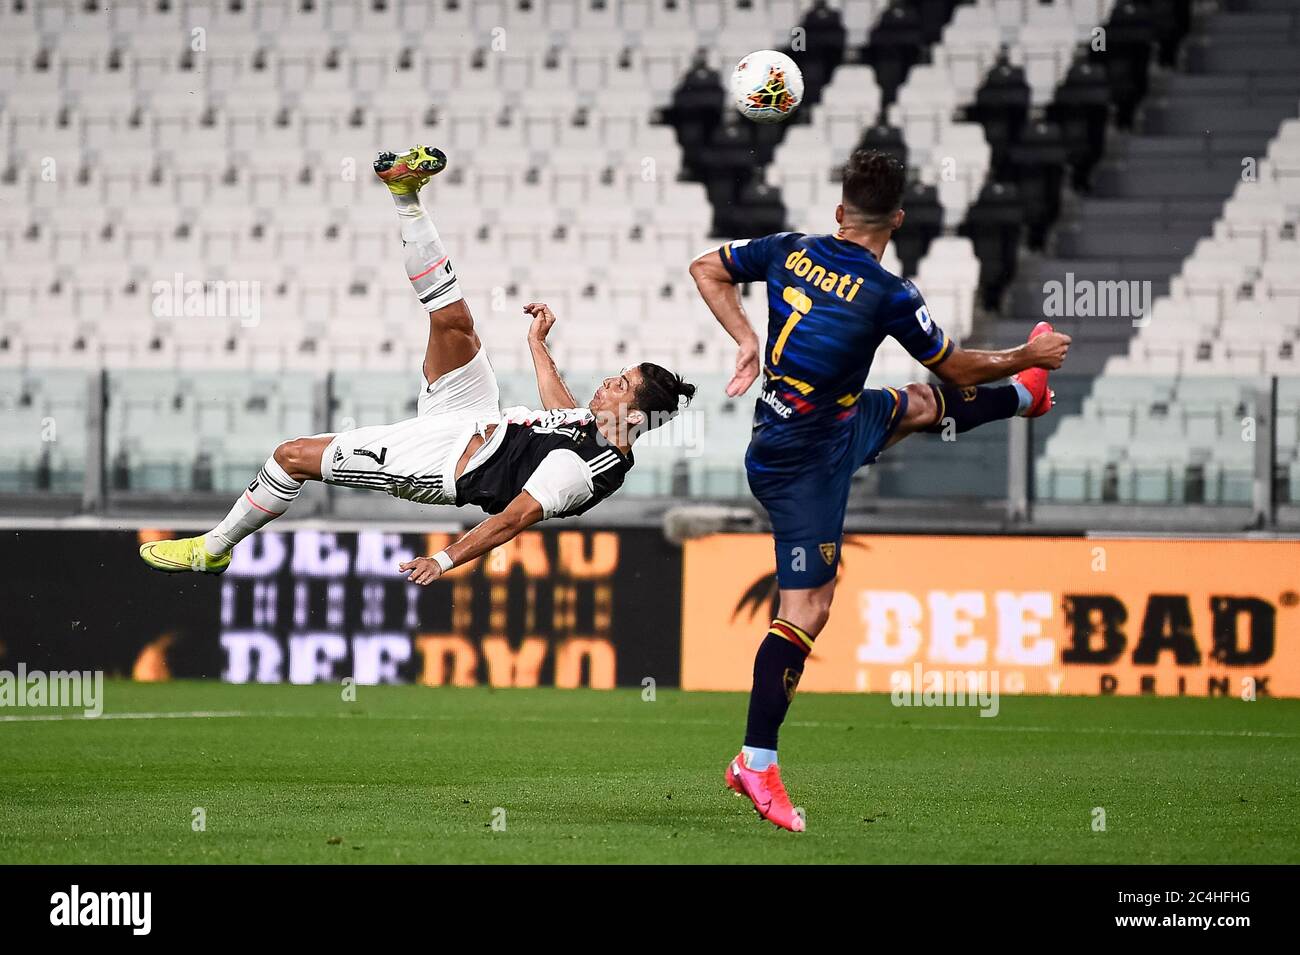 Turin, Italy - 26 June, 2020: Cristiano Ronaldo of Juventus FC attempts a bicycle kick during the Serie A football match between Juventus FC and US Lecce. Juventus FC won 4-0 over US Lecce. Credit: Nicolò Campo/Alamy Live News Stock Photo